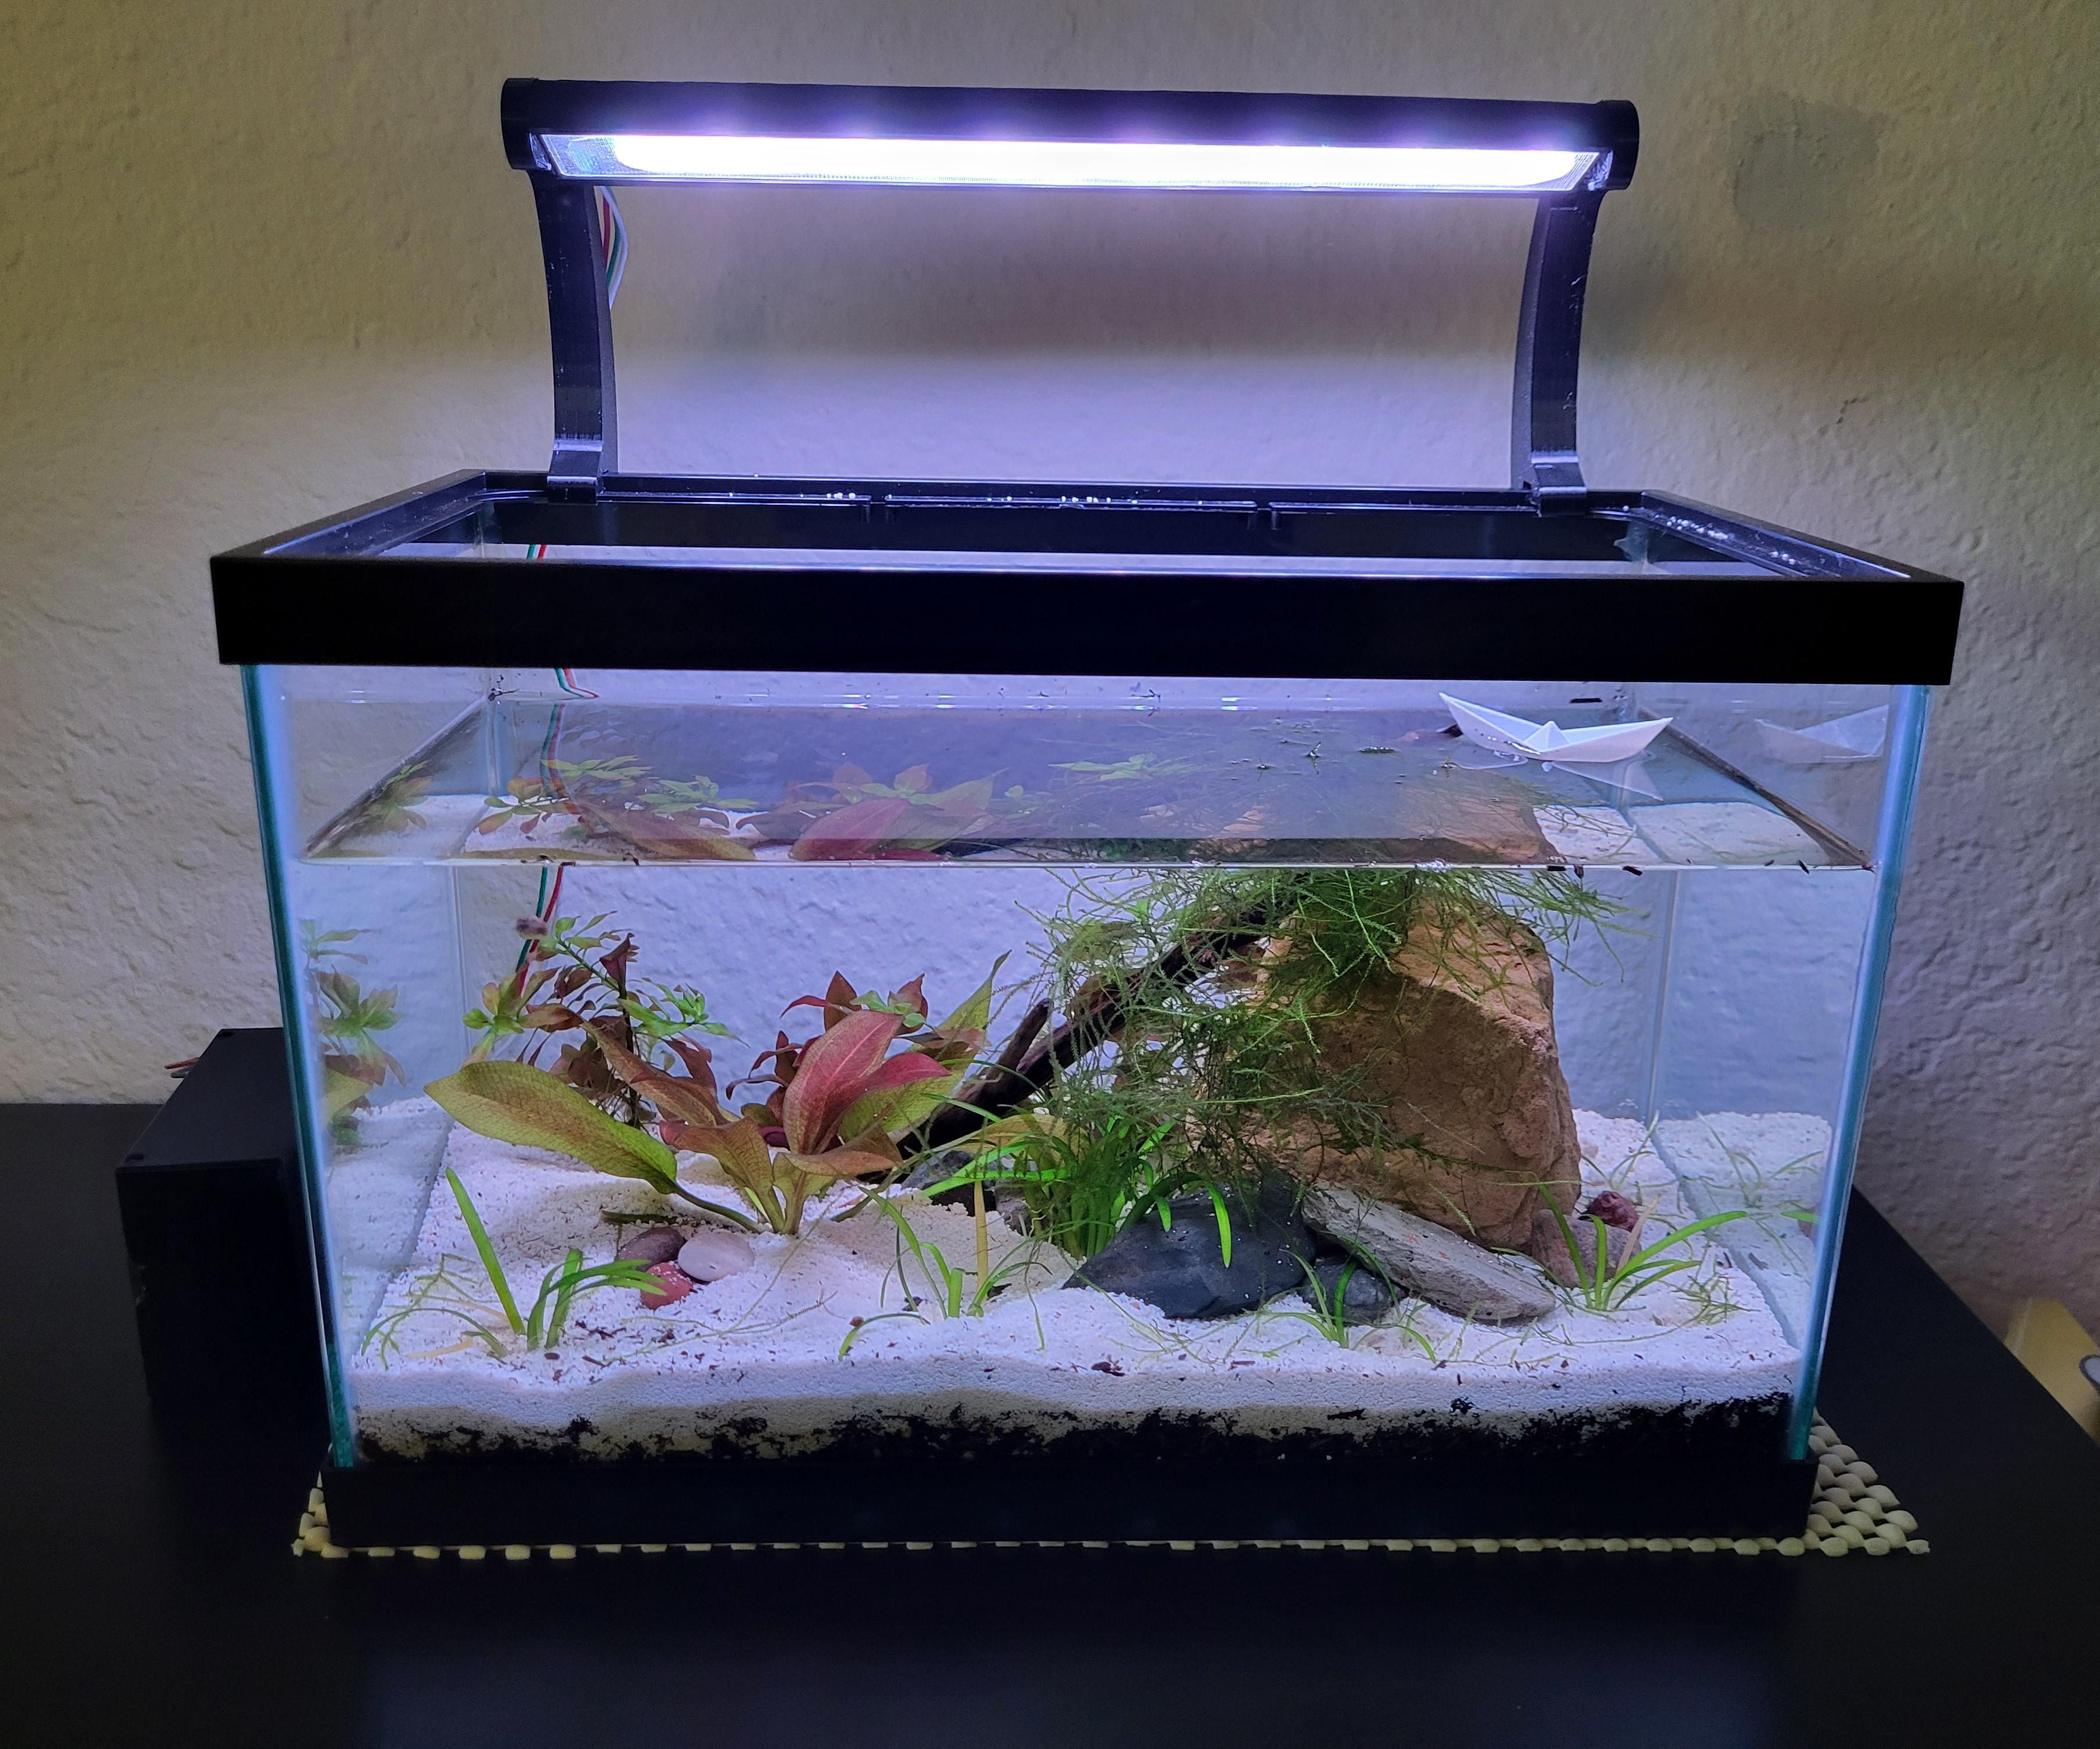 LED Light Fixture on a Timer for Planted Tanks and Aquariums